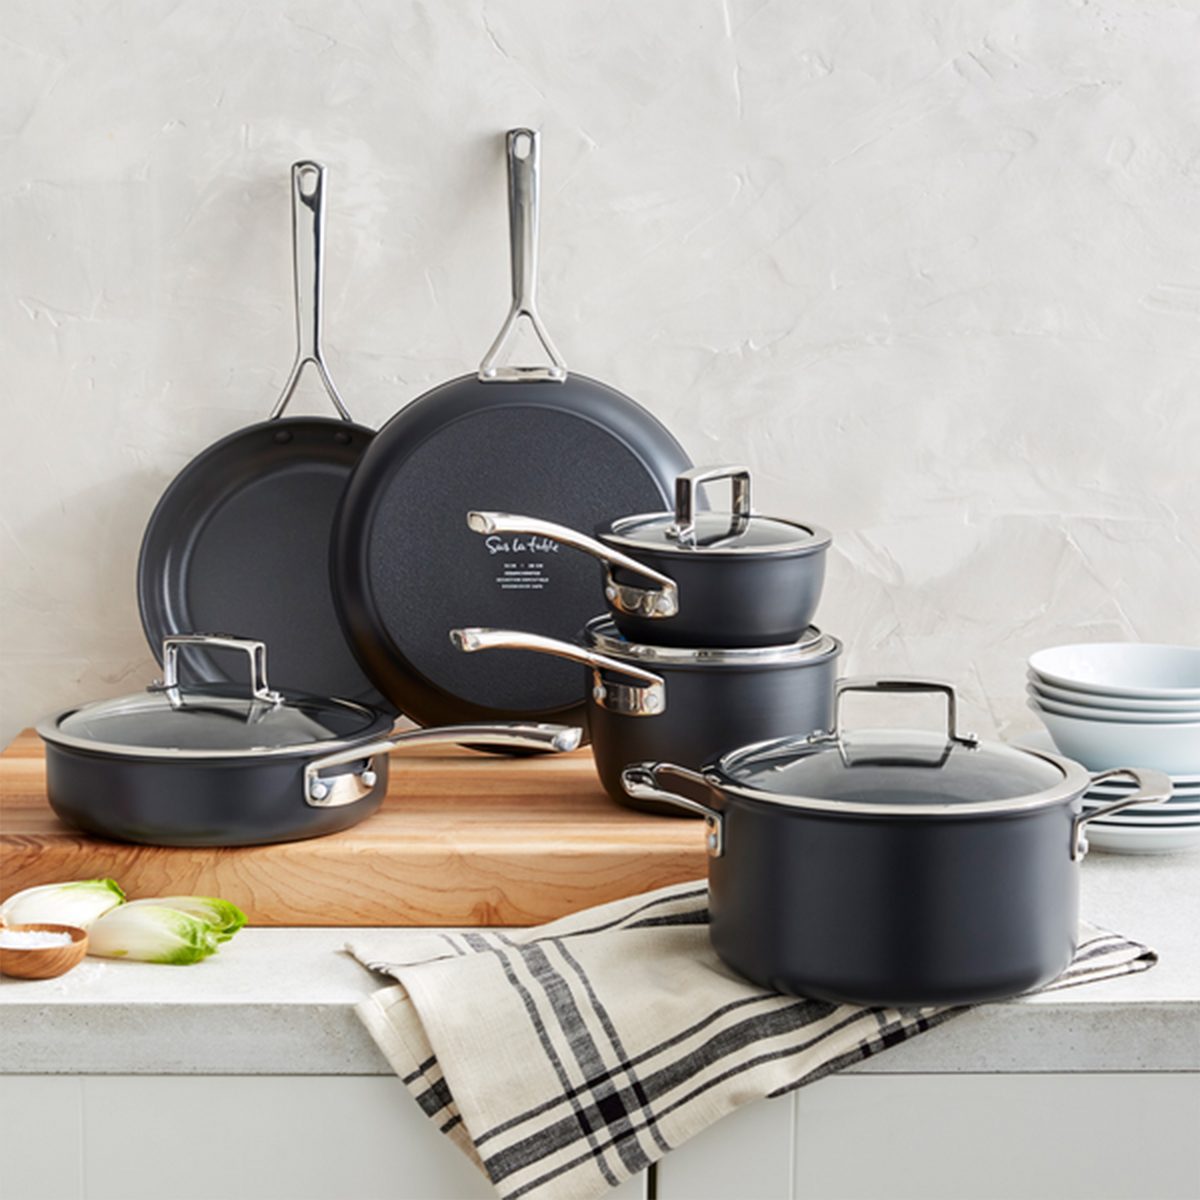 Sur La Table has a ton of All-Clad cookware on sale